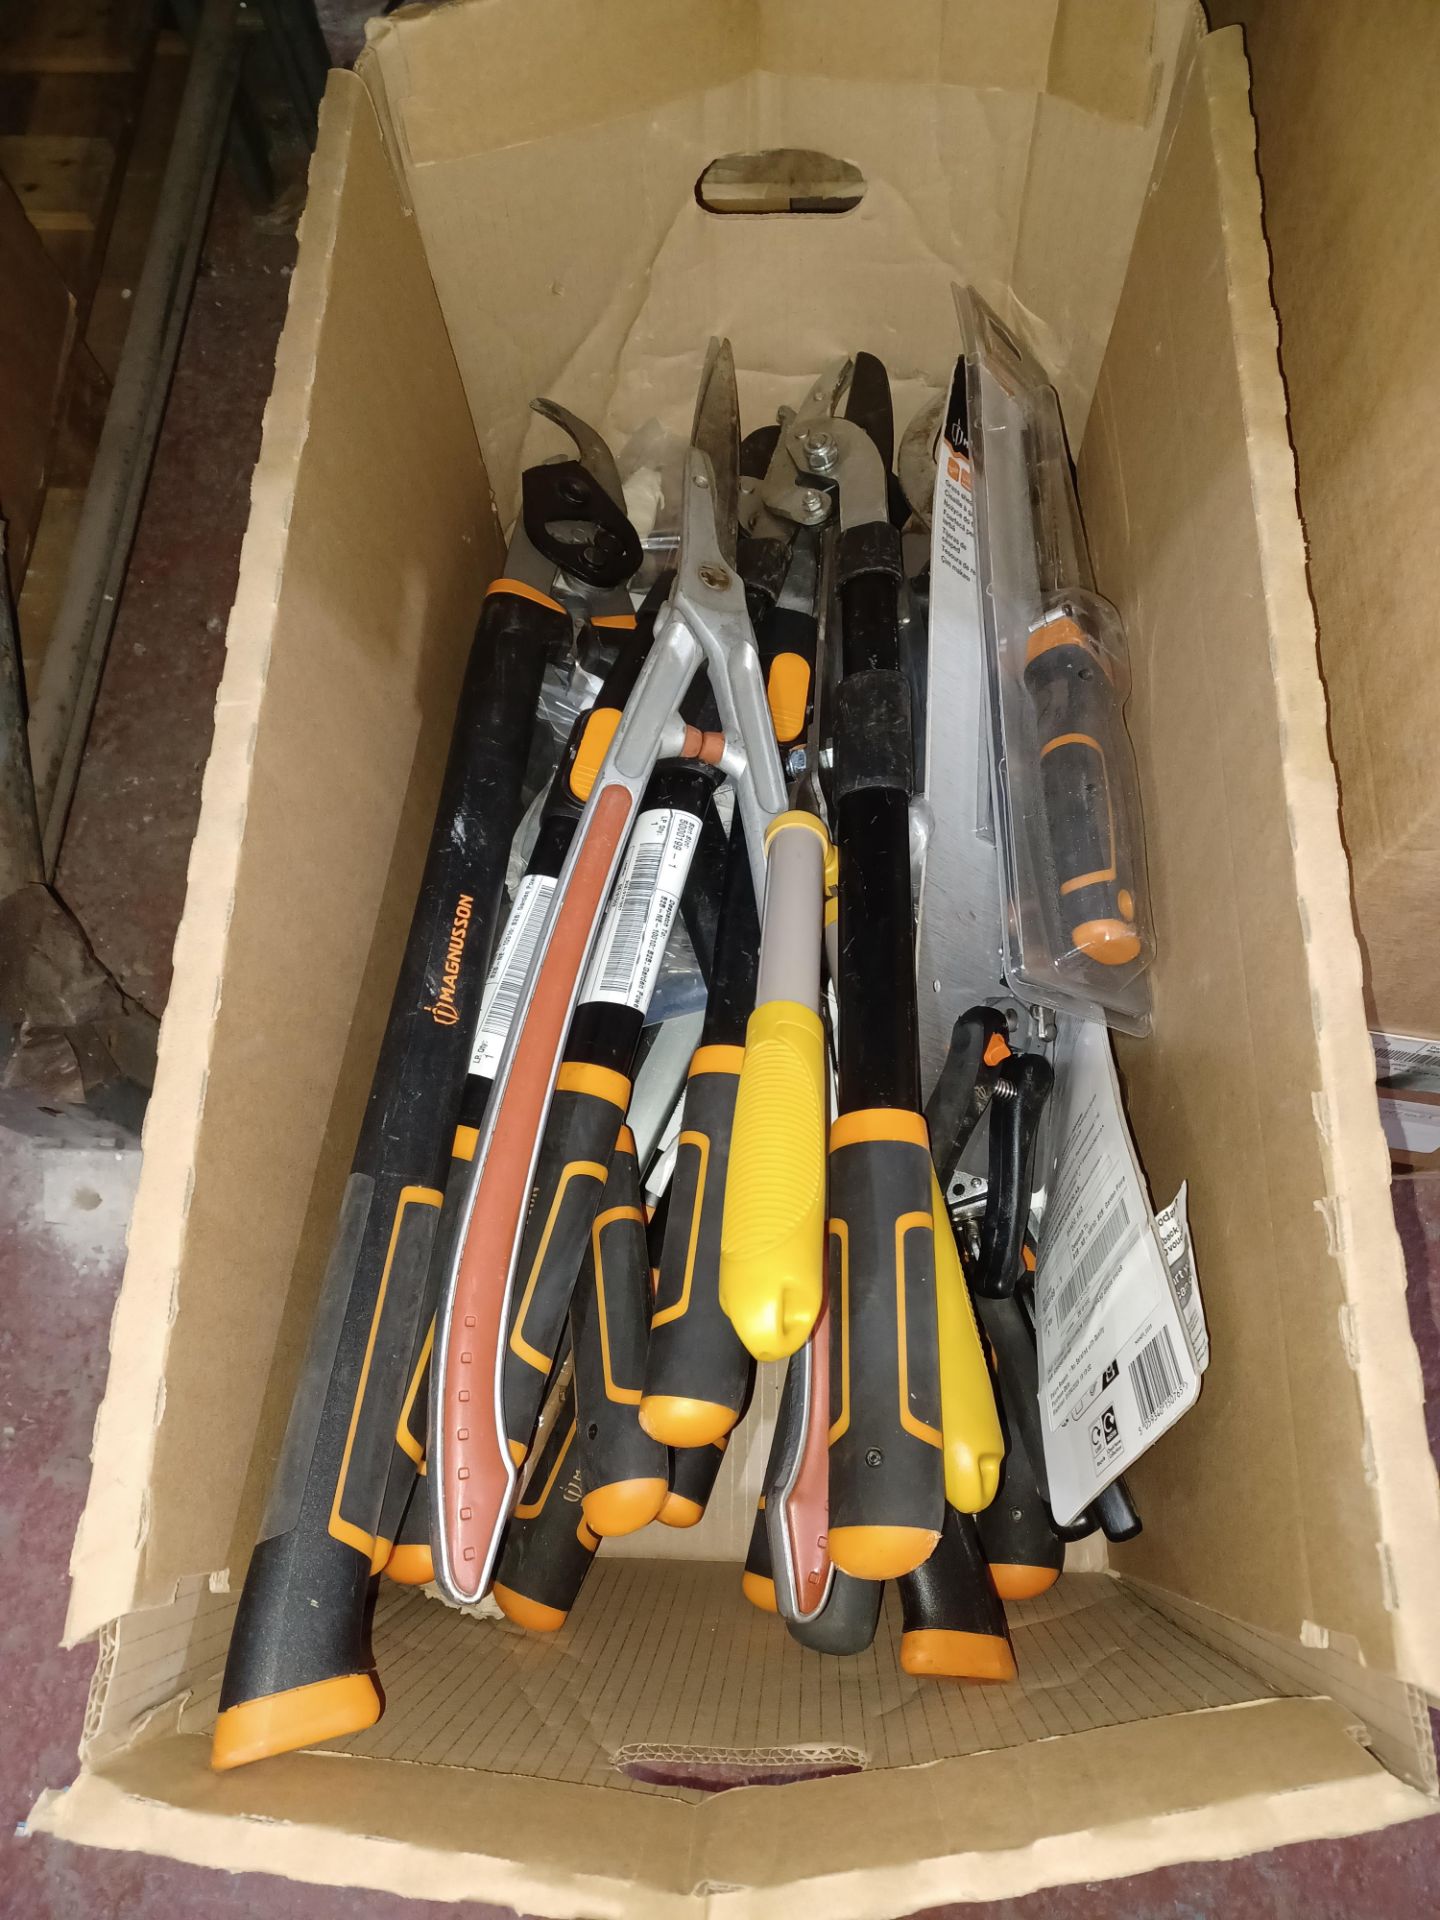 23 x Mixed Lot of Shears, Garden Scissors, Pruners and more. - R13a.9.